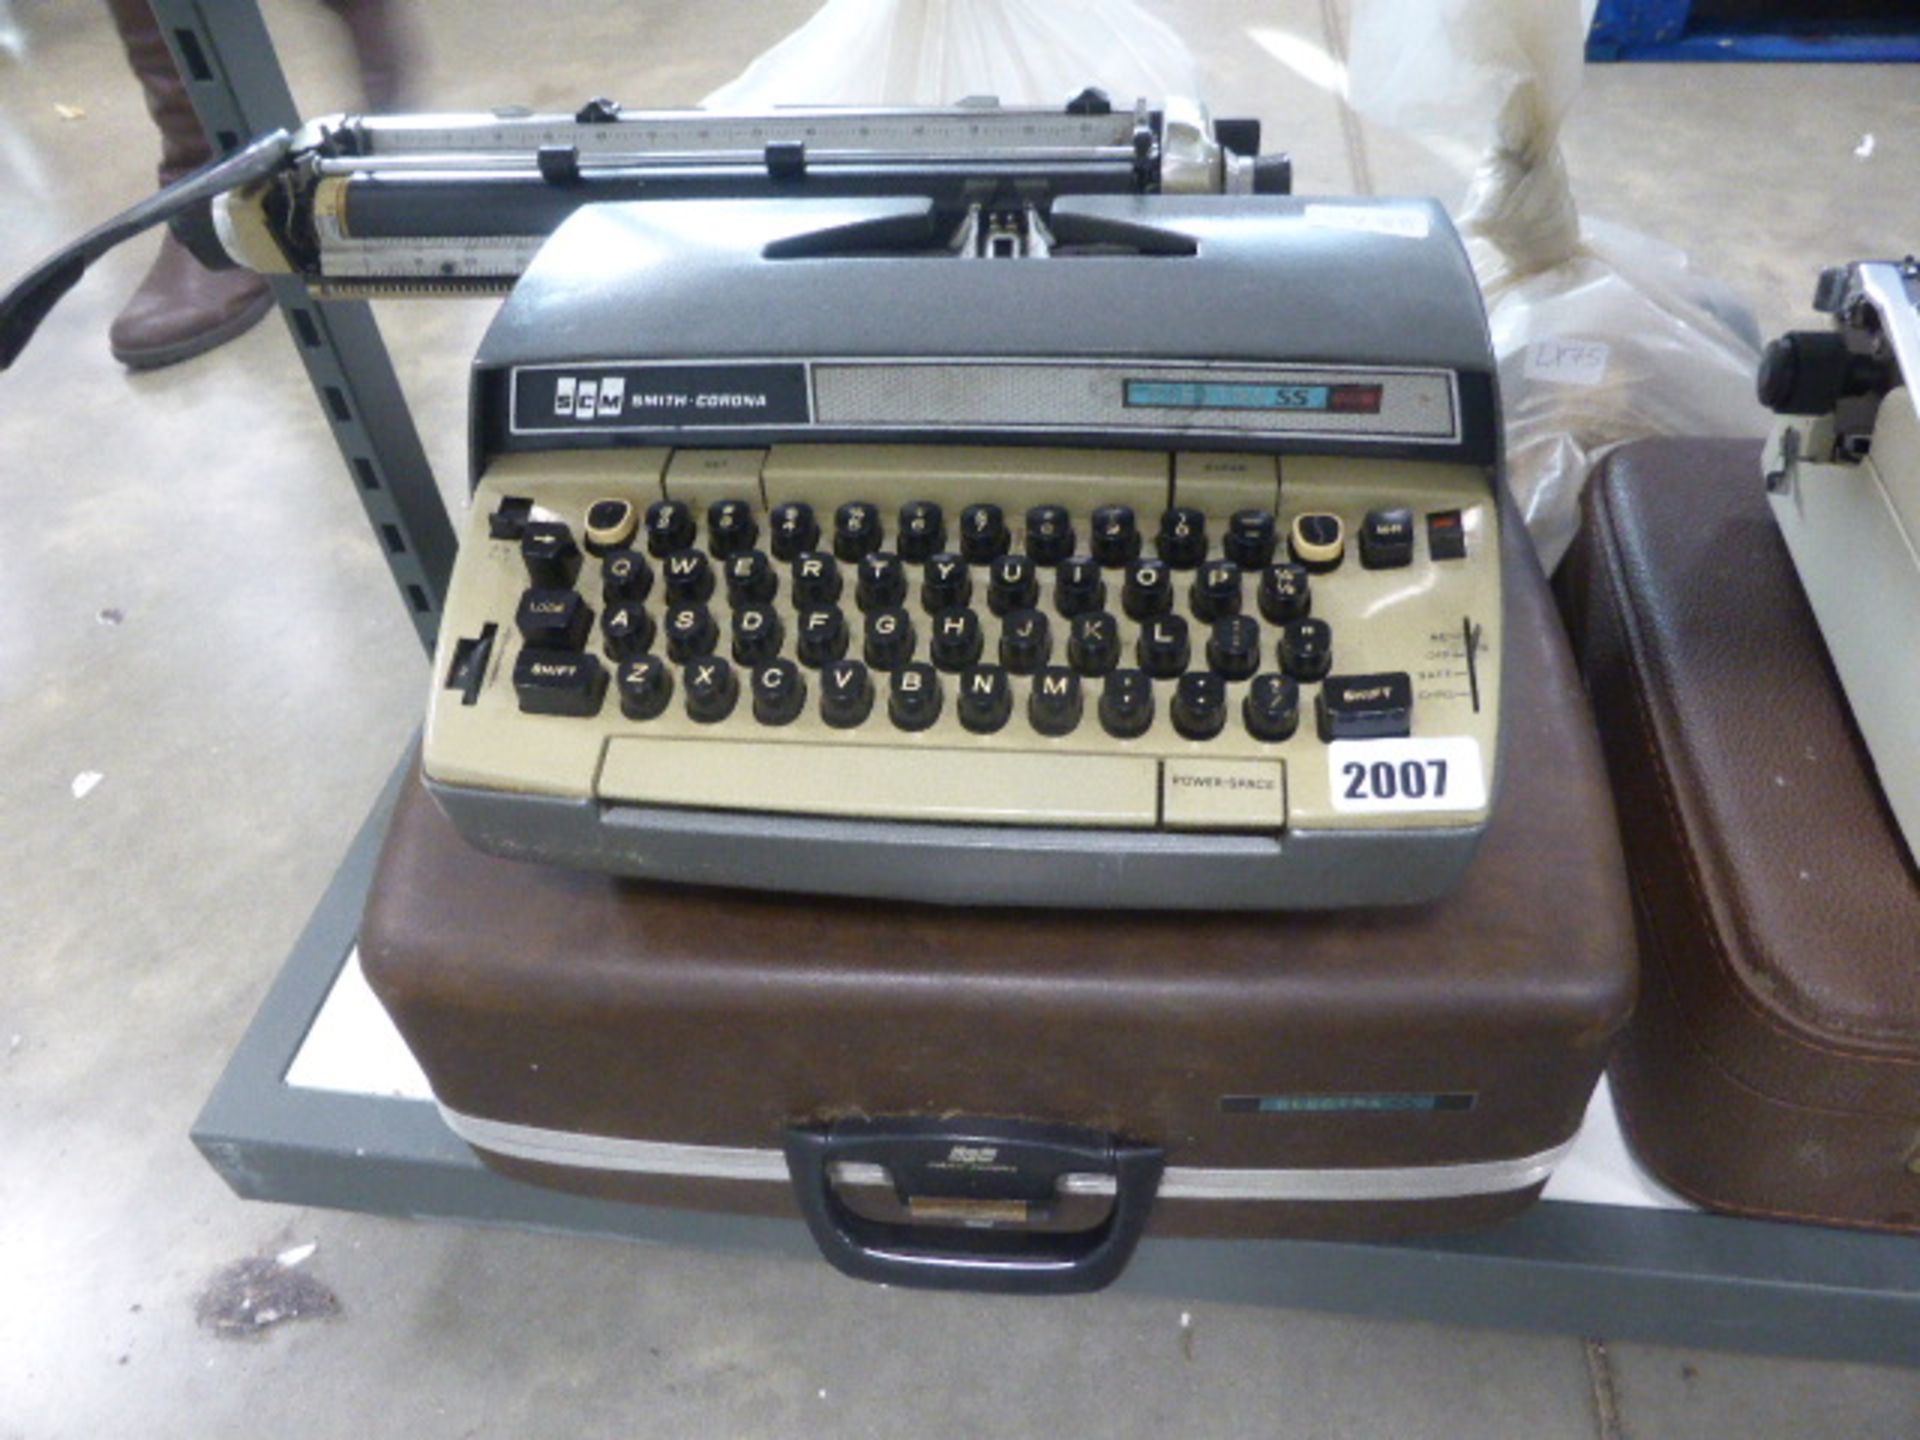 Swiss Carona Electra SS typewriter with carry case